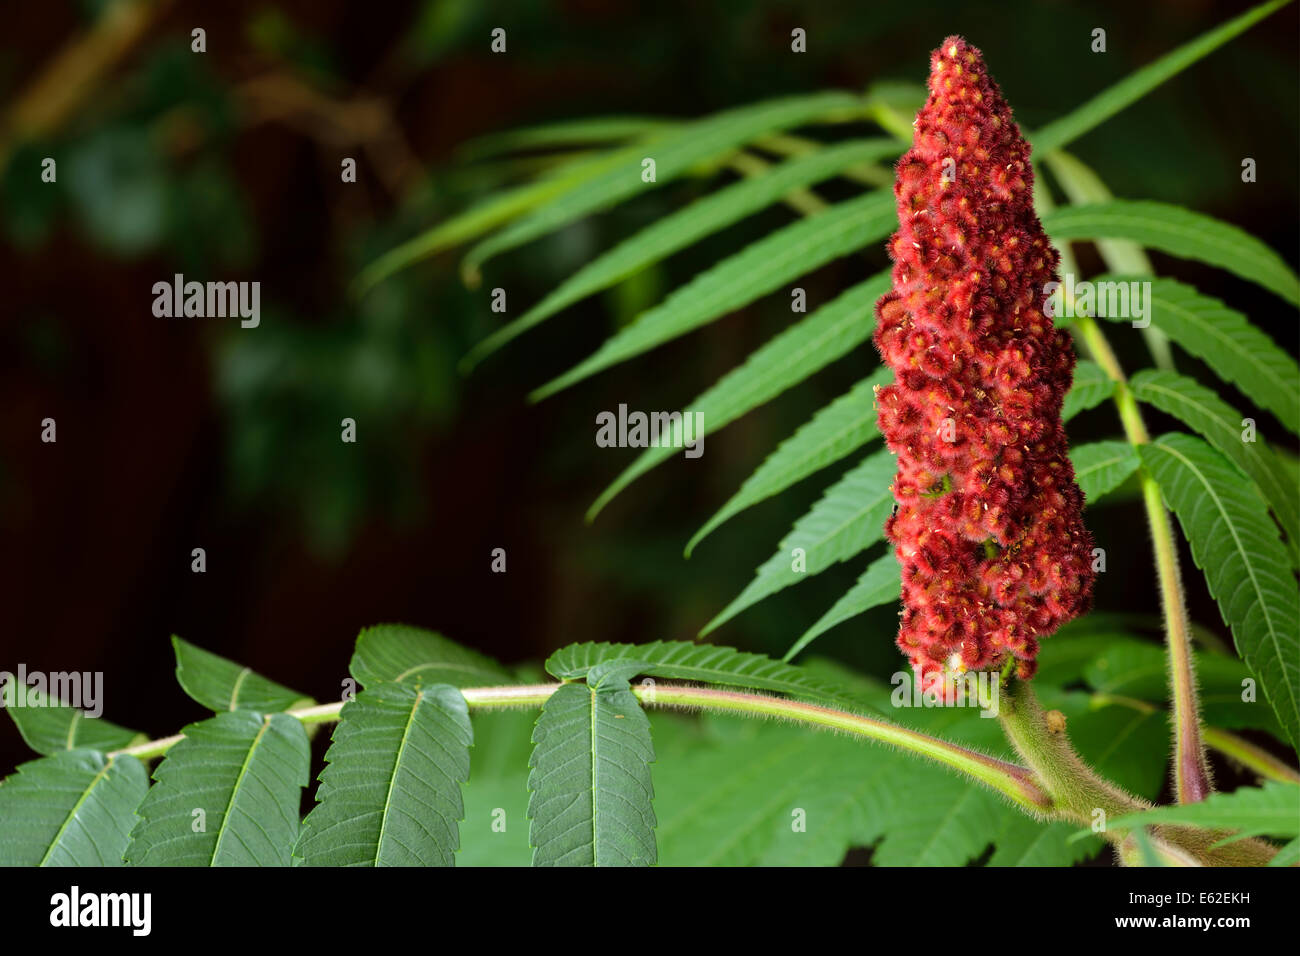 Red drupe and fuzzy stem of a Staghorn Sumac with green compound leaves Stock Photo